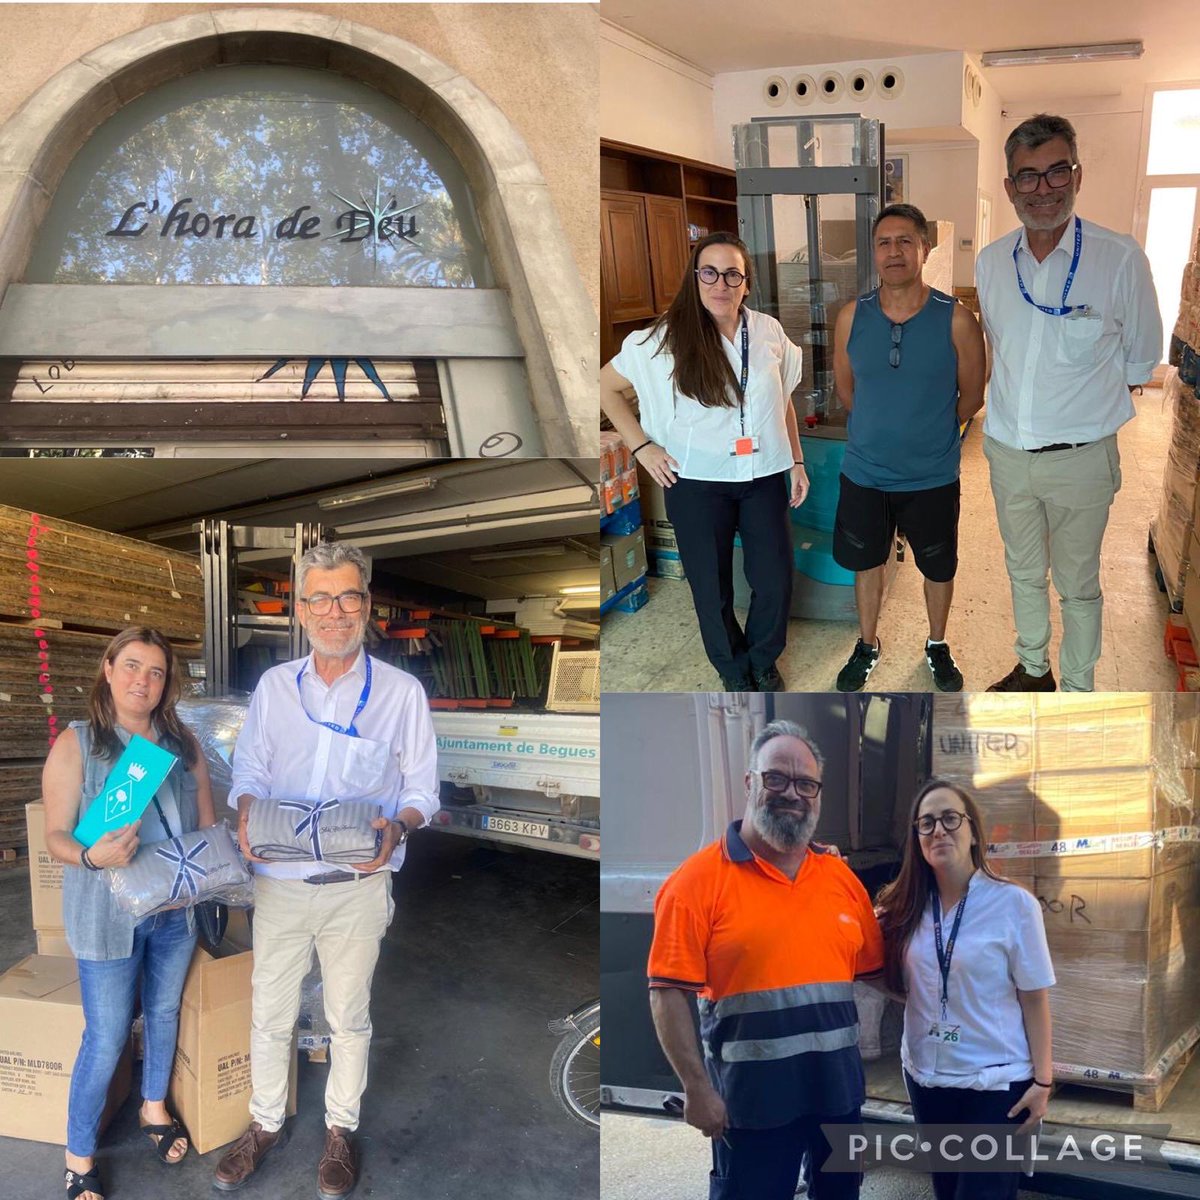 ⁦@united⁩ donated 120 Duvets each to ONG L’hora de Deu and to the Refugee Hostal in Begues as part of our commitment to our local communities #septemberofservice @ajuntamentdebegues ⁦@mariallauradof⁩ ⁦@AlfredGisbert⁩